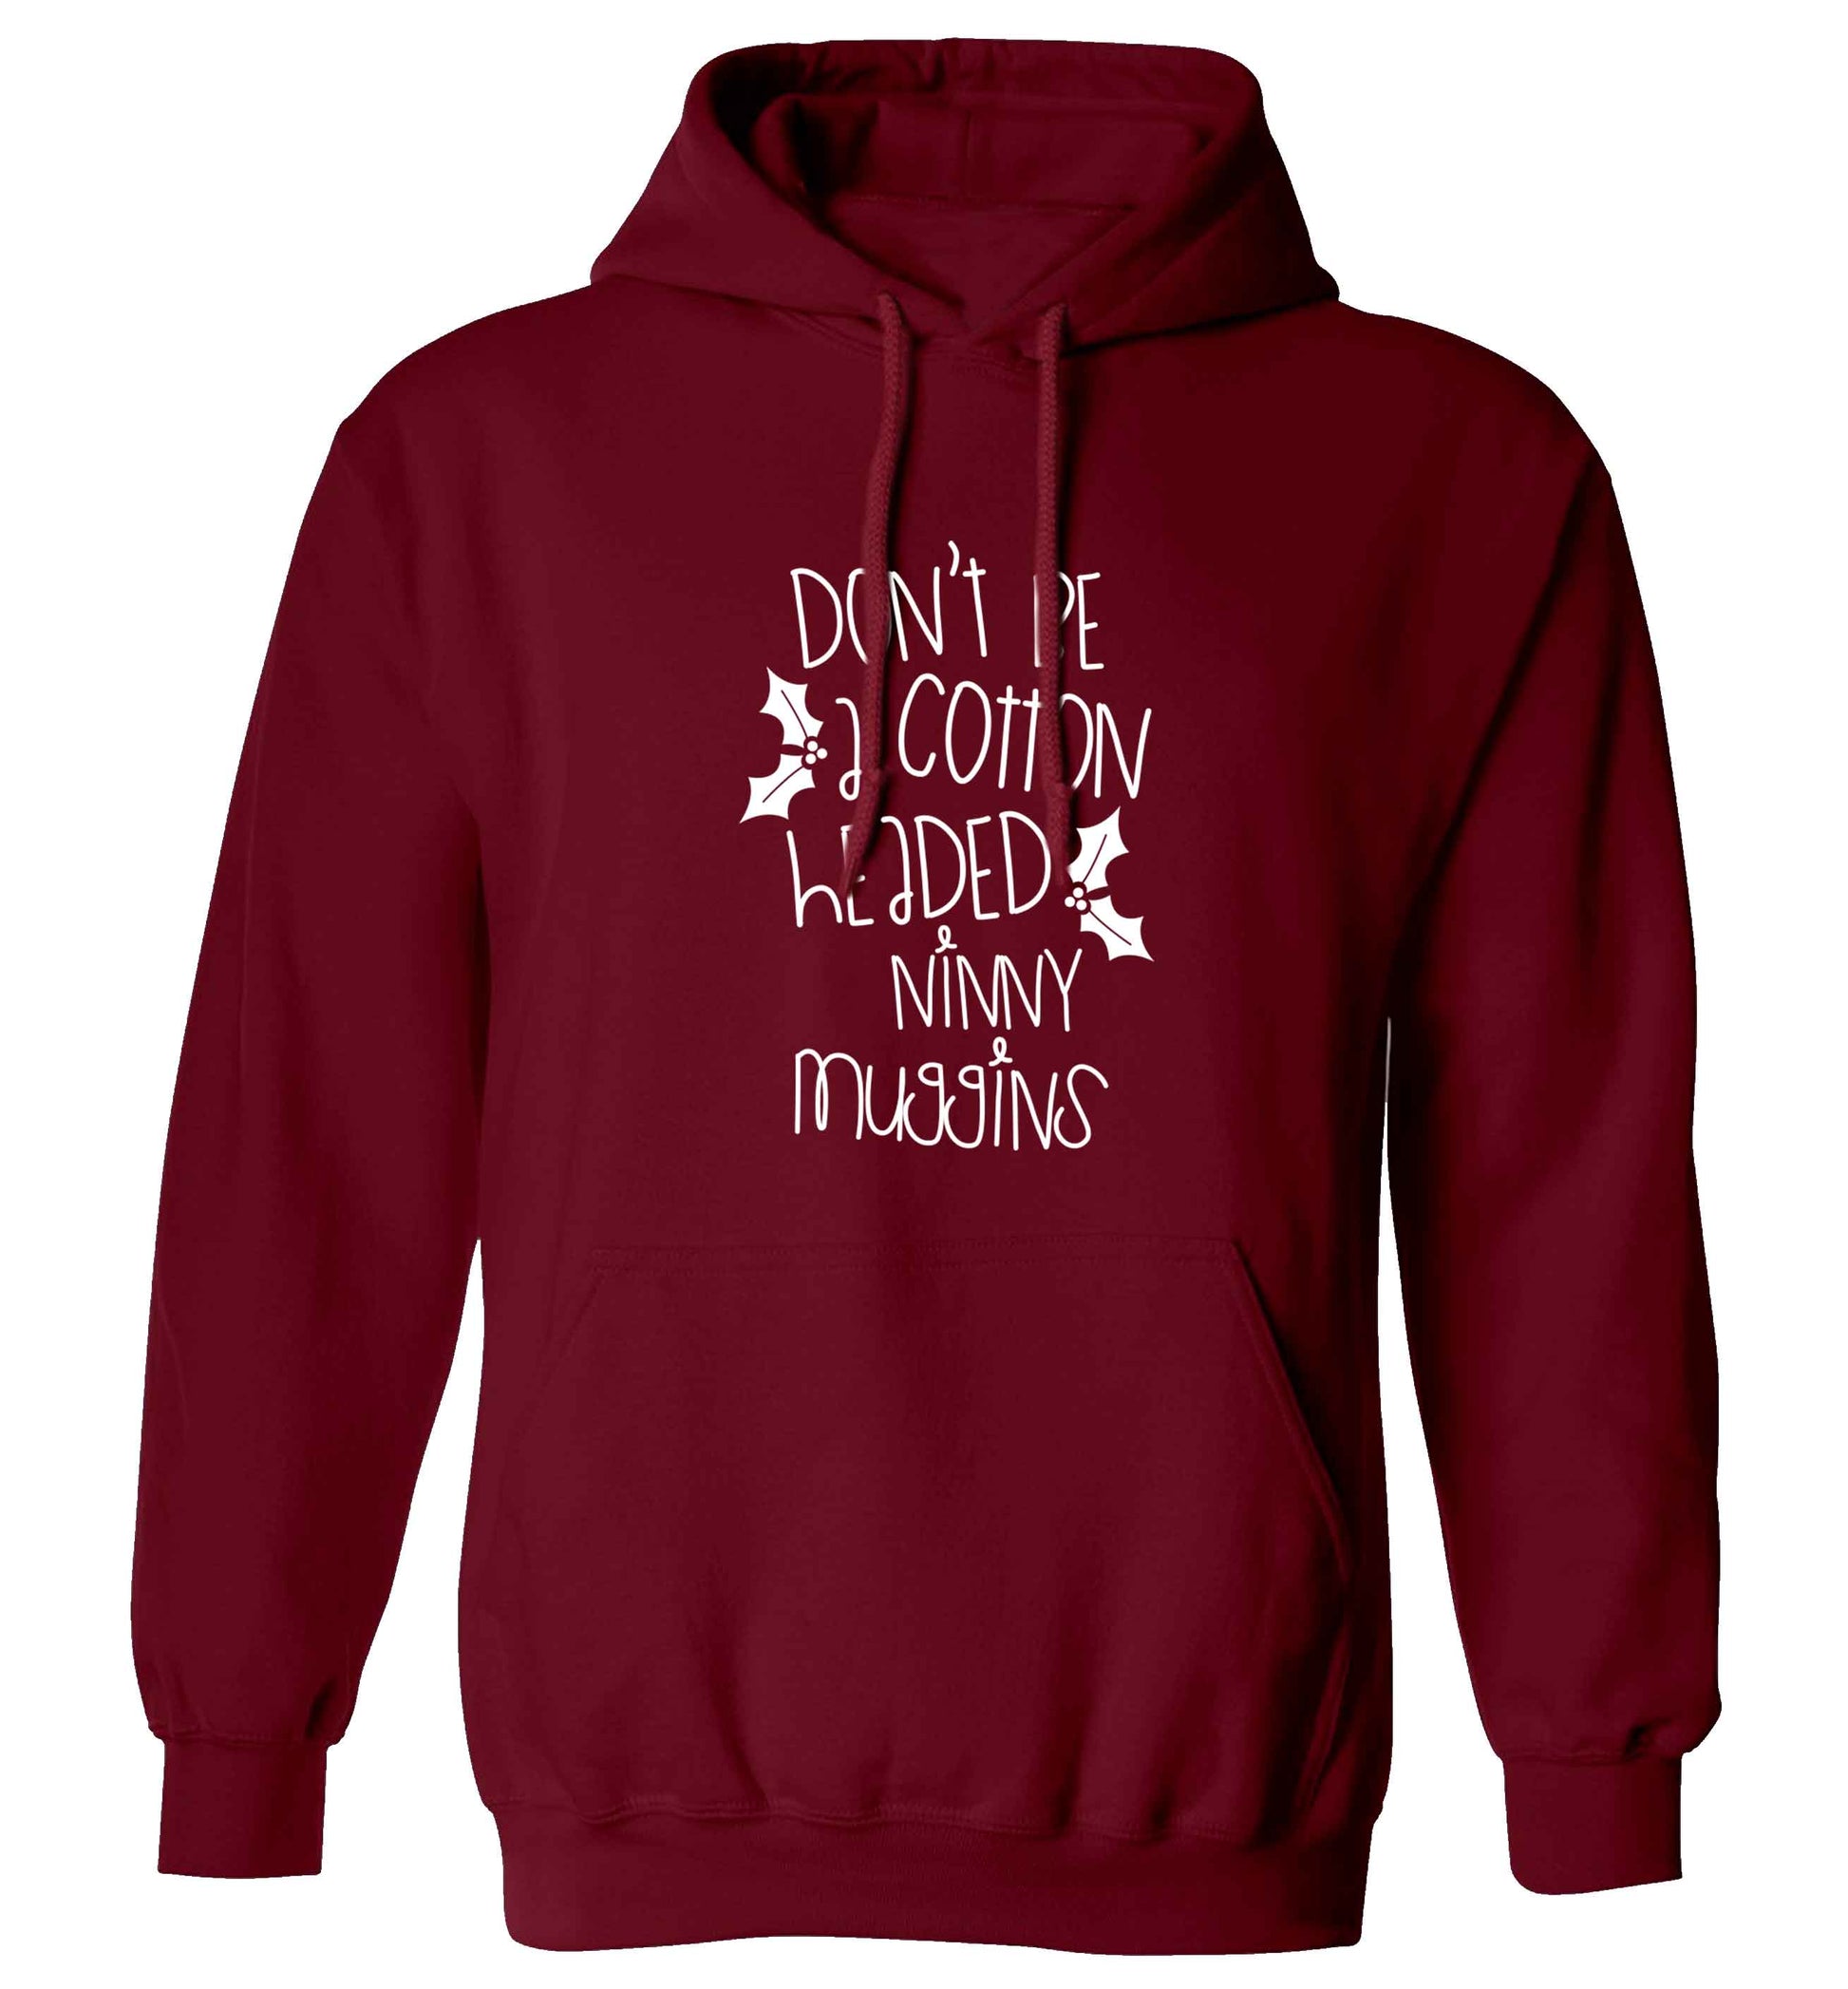 Too Late to be Good adults unisex maroon hoodie 2XL